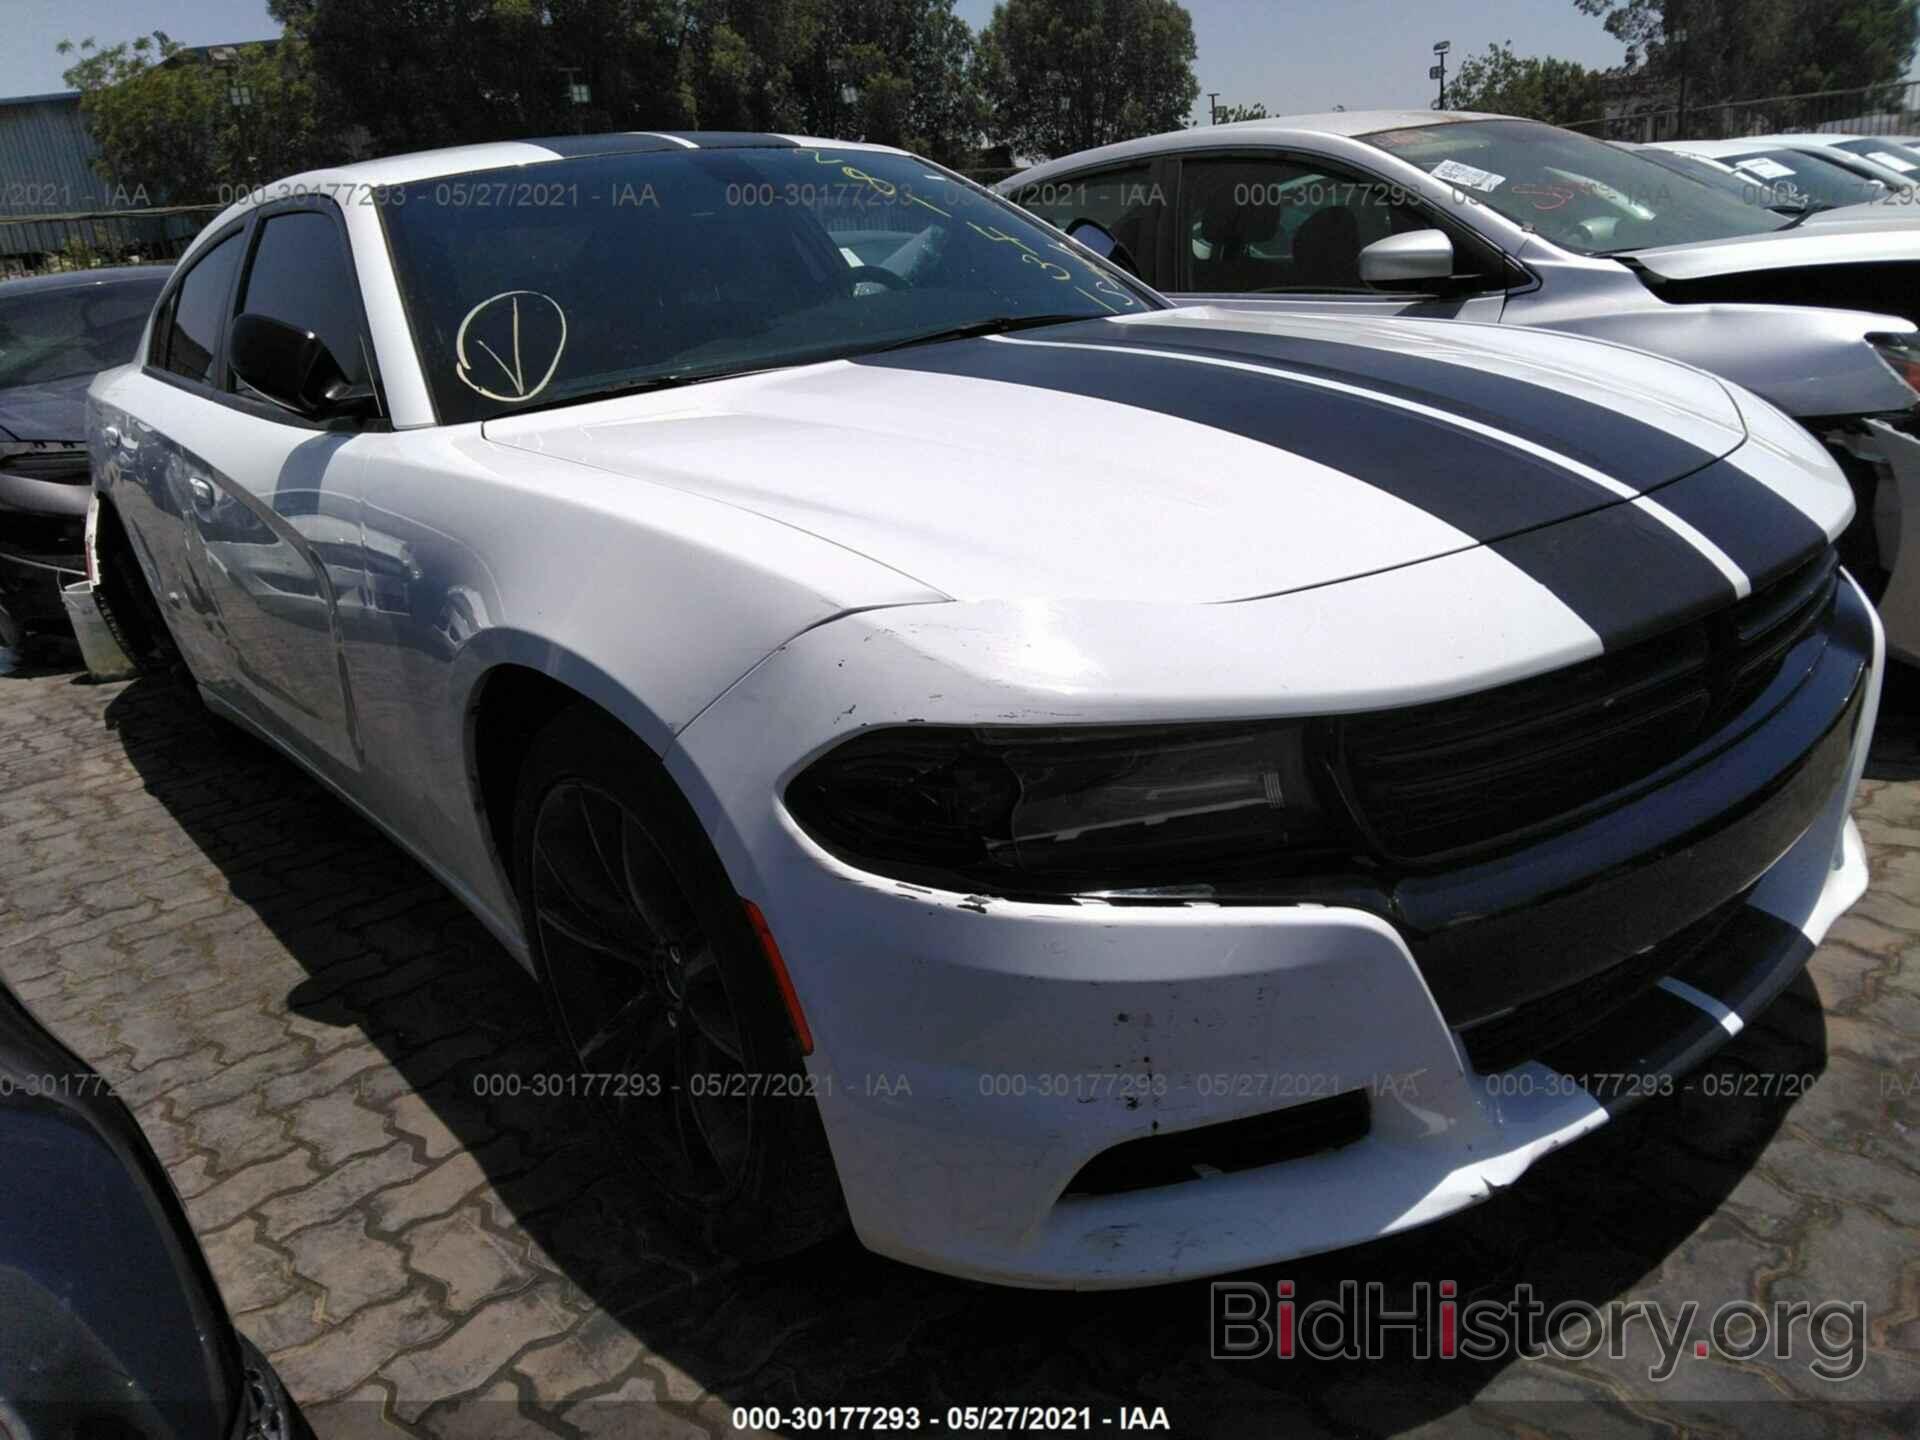 Photo 00000000000281431 - DODGE CHARGER 2018